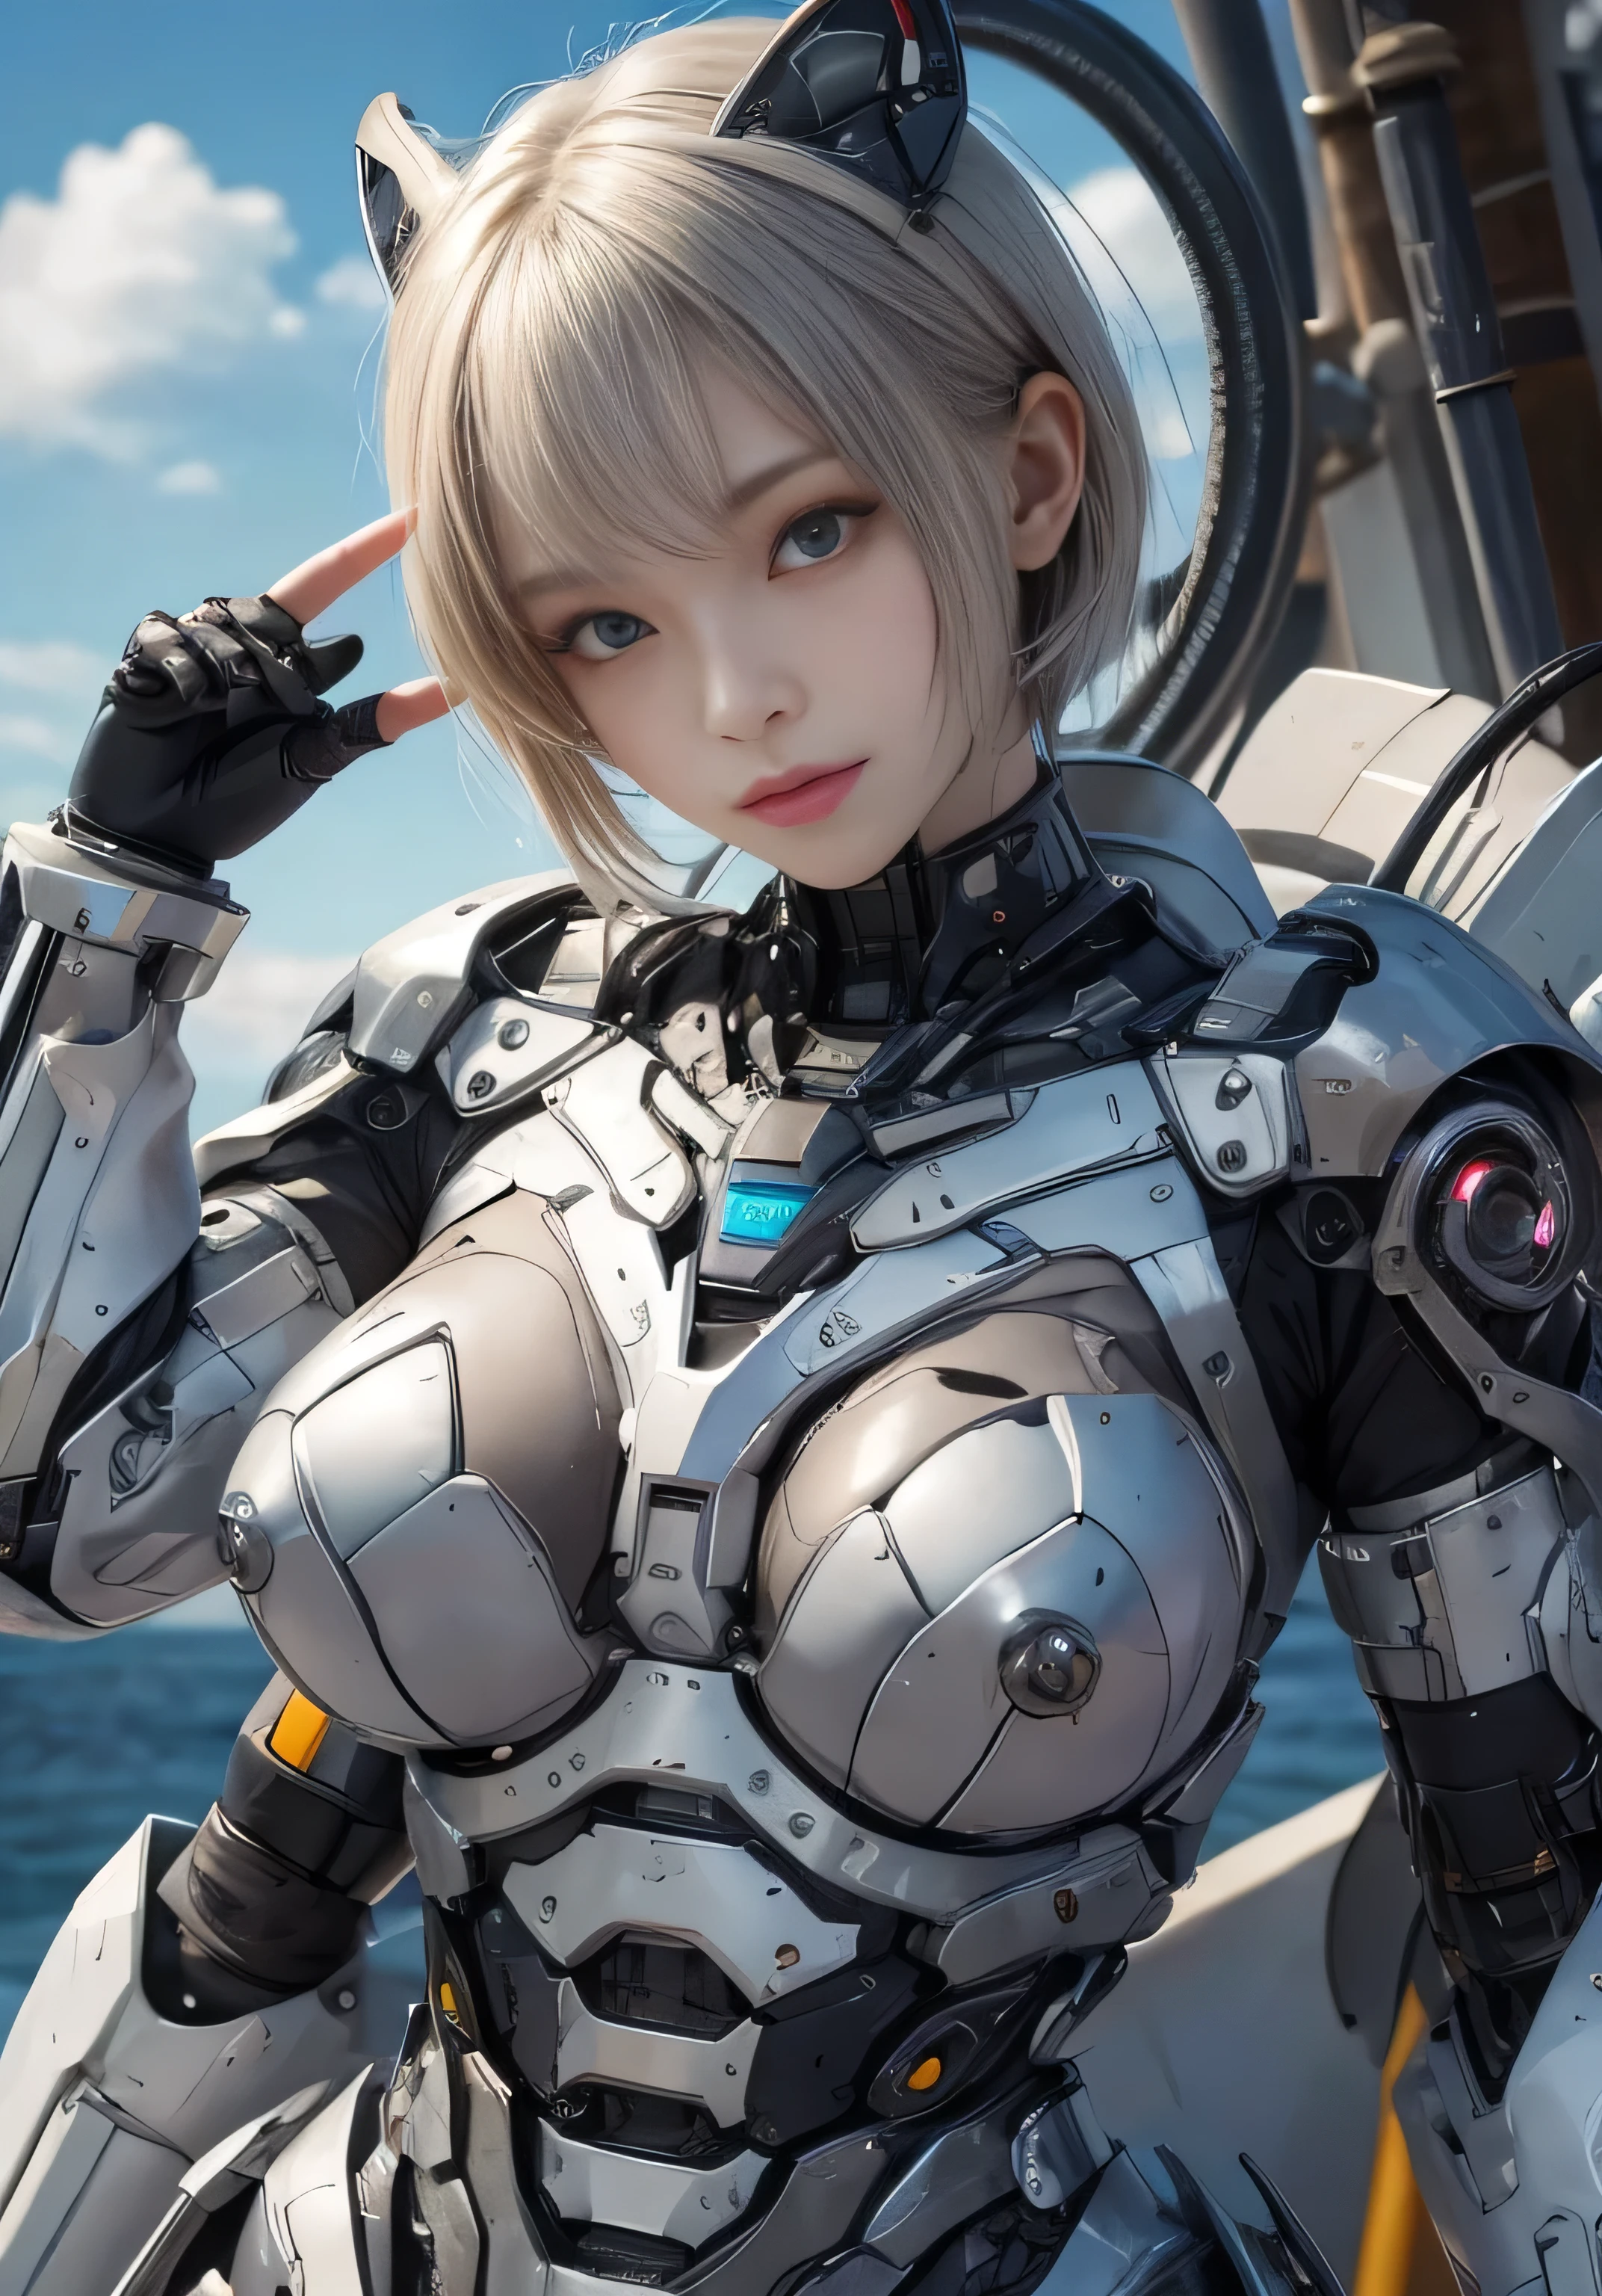 (RAW quality:1.4), Textured skin, Short Hair, Super detailed, Attention to detail, high quality, 最high quality, High resolution, 1080p, hard disk, young, beautiful,(cyborg),beautifulcyborgwoman,Mecha Cyborg Girl,Battle Mode,Girl with a mechanical body,She wears an erotic and revealing cyborg mech,Cowboy Shot, Mecha with exposed underbust and lower abdomen, (hard nipples erect:1.4), (nipples pointing up:1.4), (A little pubic hair:1.4), White Gundam Mecha, Combat pose,